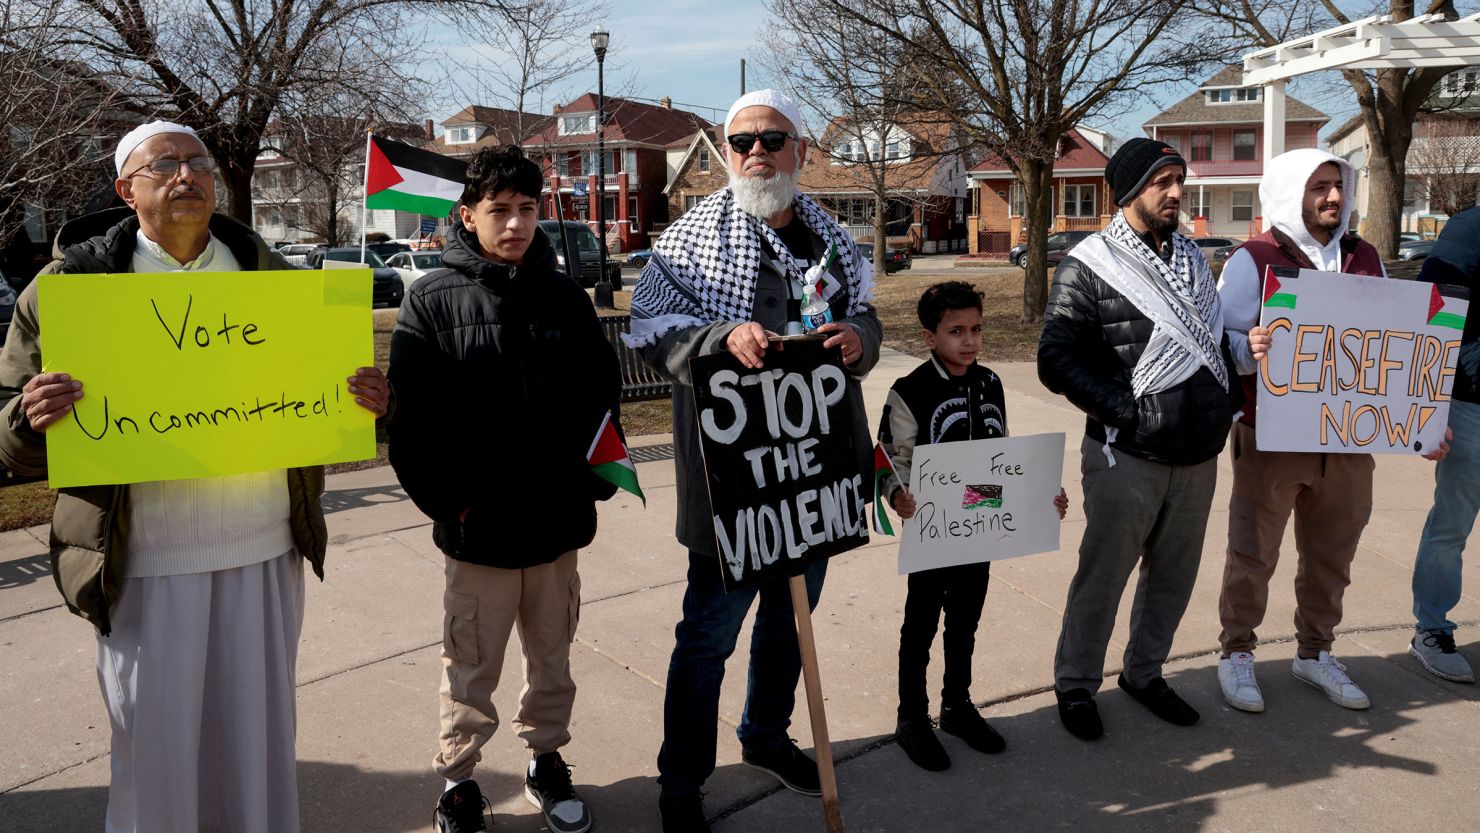 Supporters of the campaign to vote "Uncommitted" hold a rally in support of Palestinians in Gaza, ahead of Michigan's Democratic presidential primary election in Hamtramck, Michigan, on February 25, 2024.